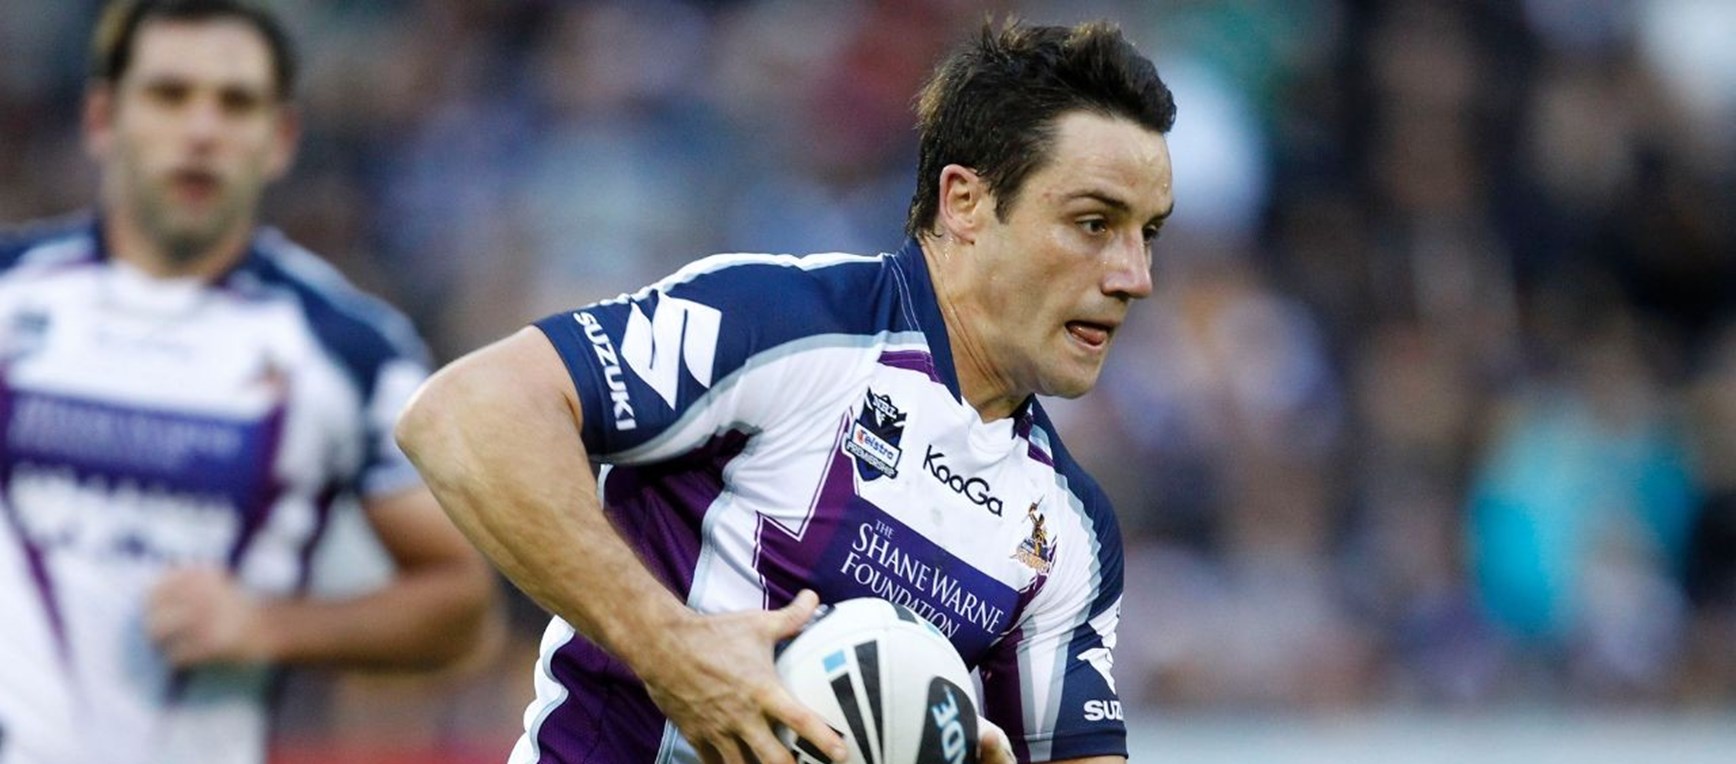 In pictures: Cronk reaches 250